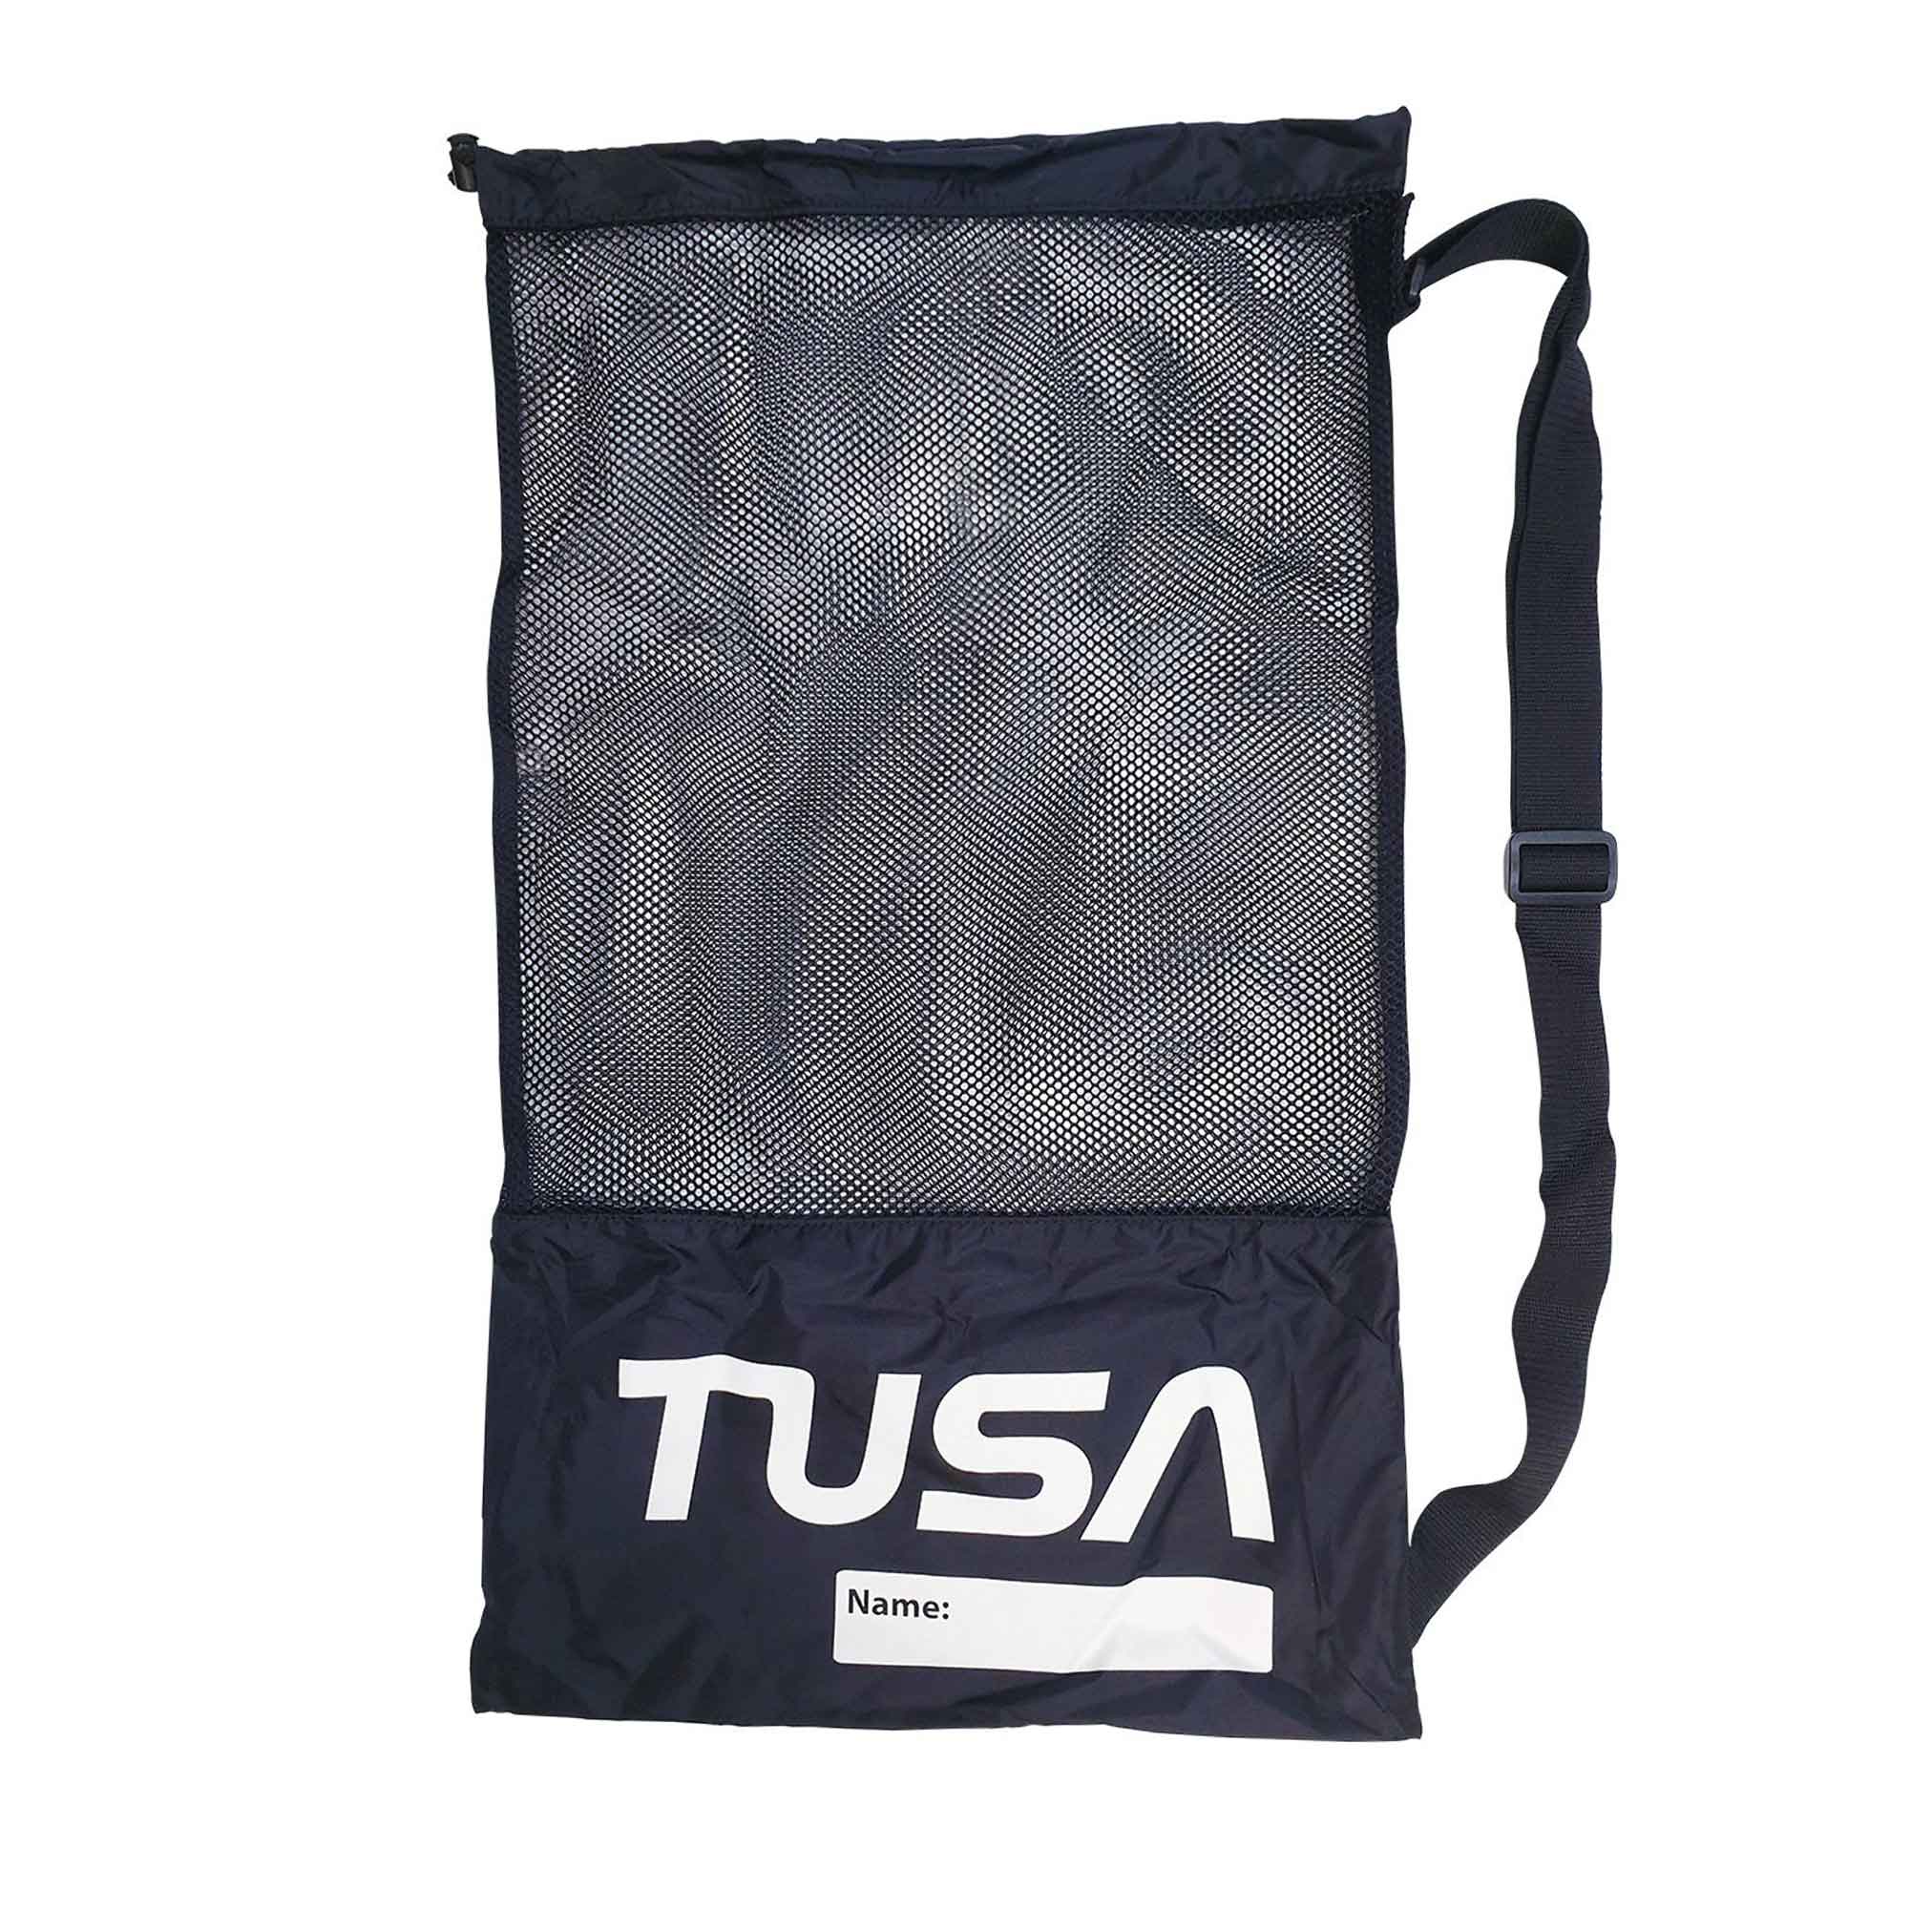 Dive Bags - Transport Your Diving Gear Safely in a Dive Bag